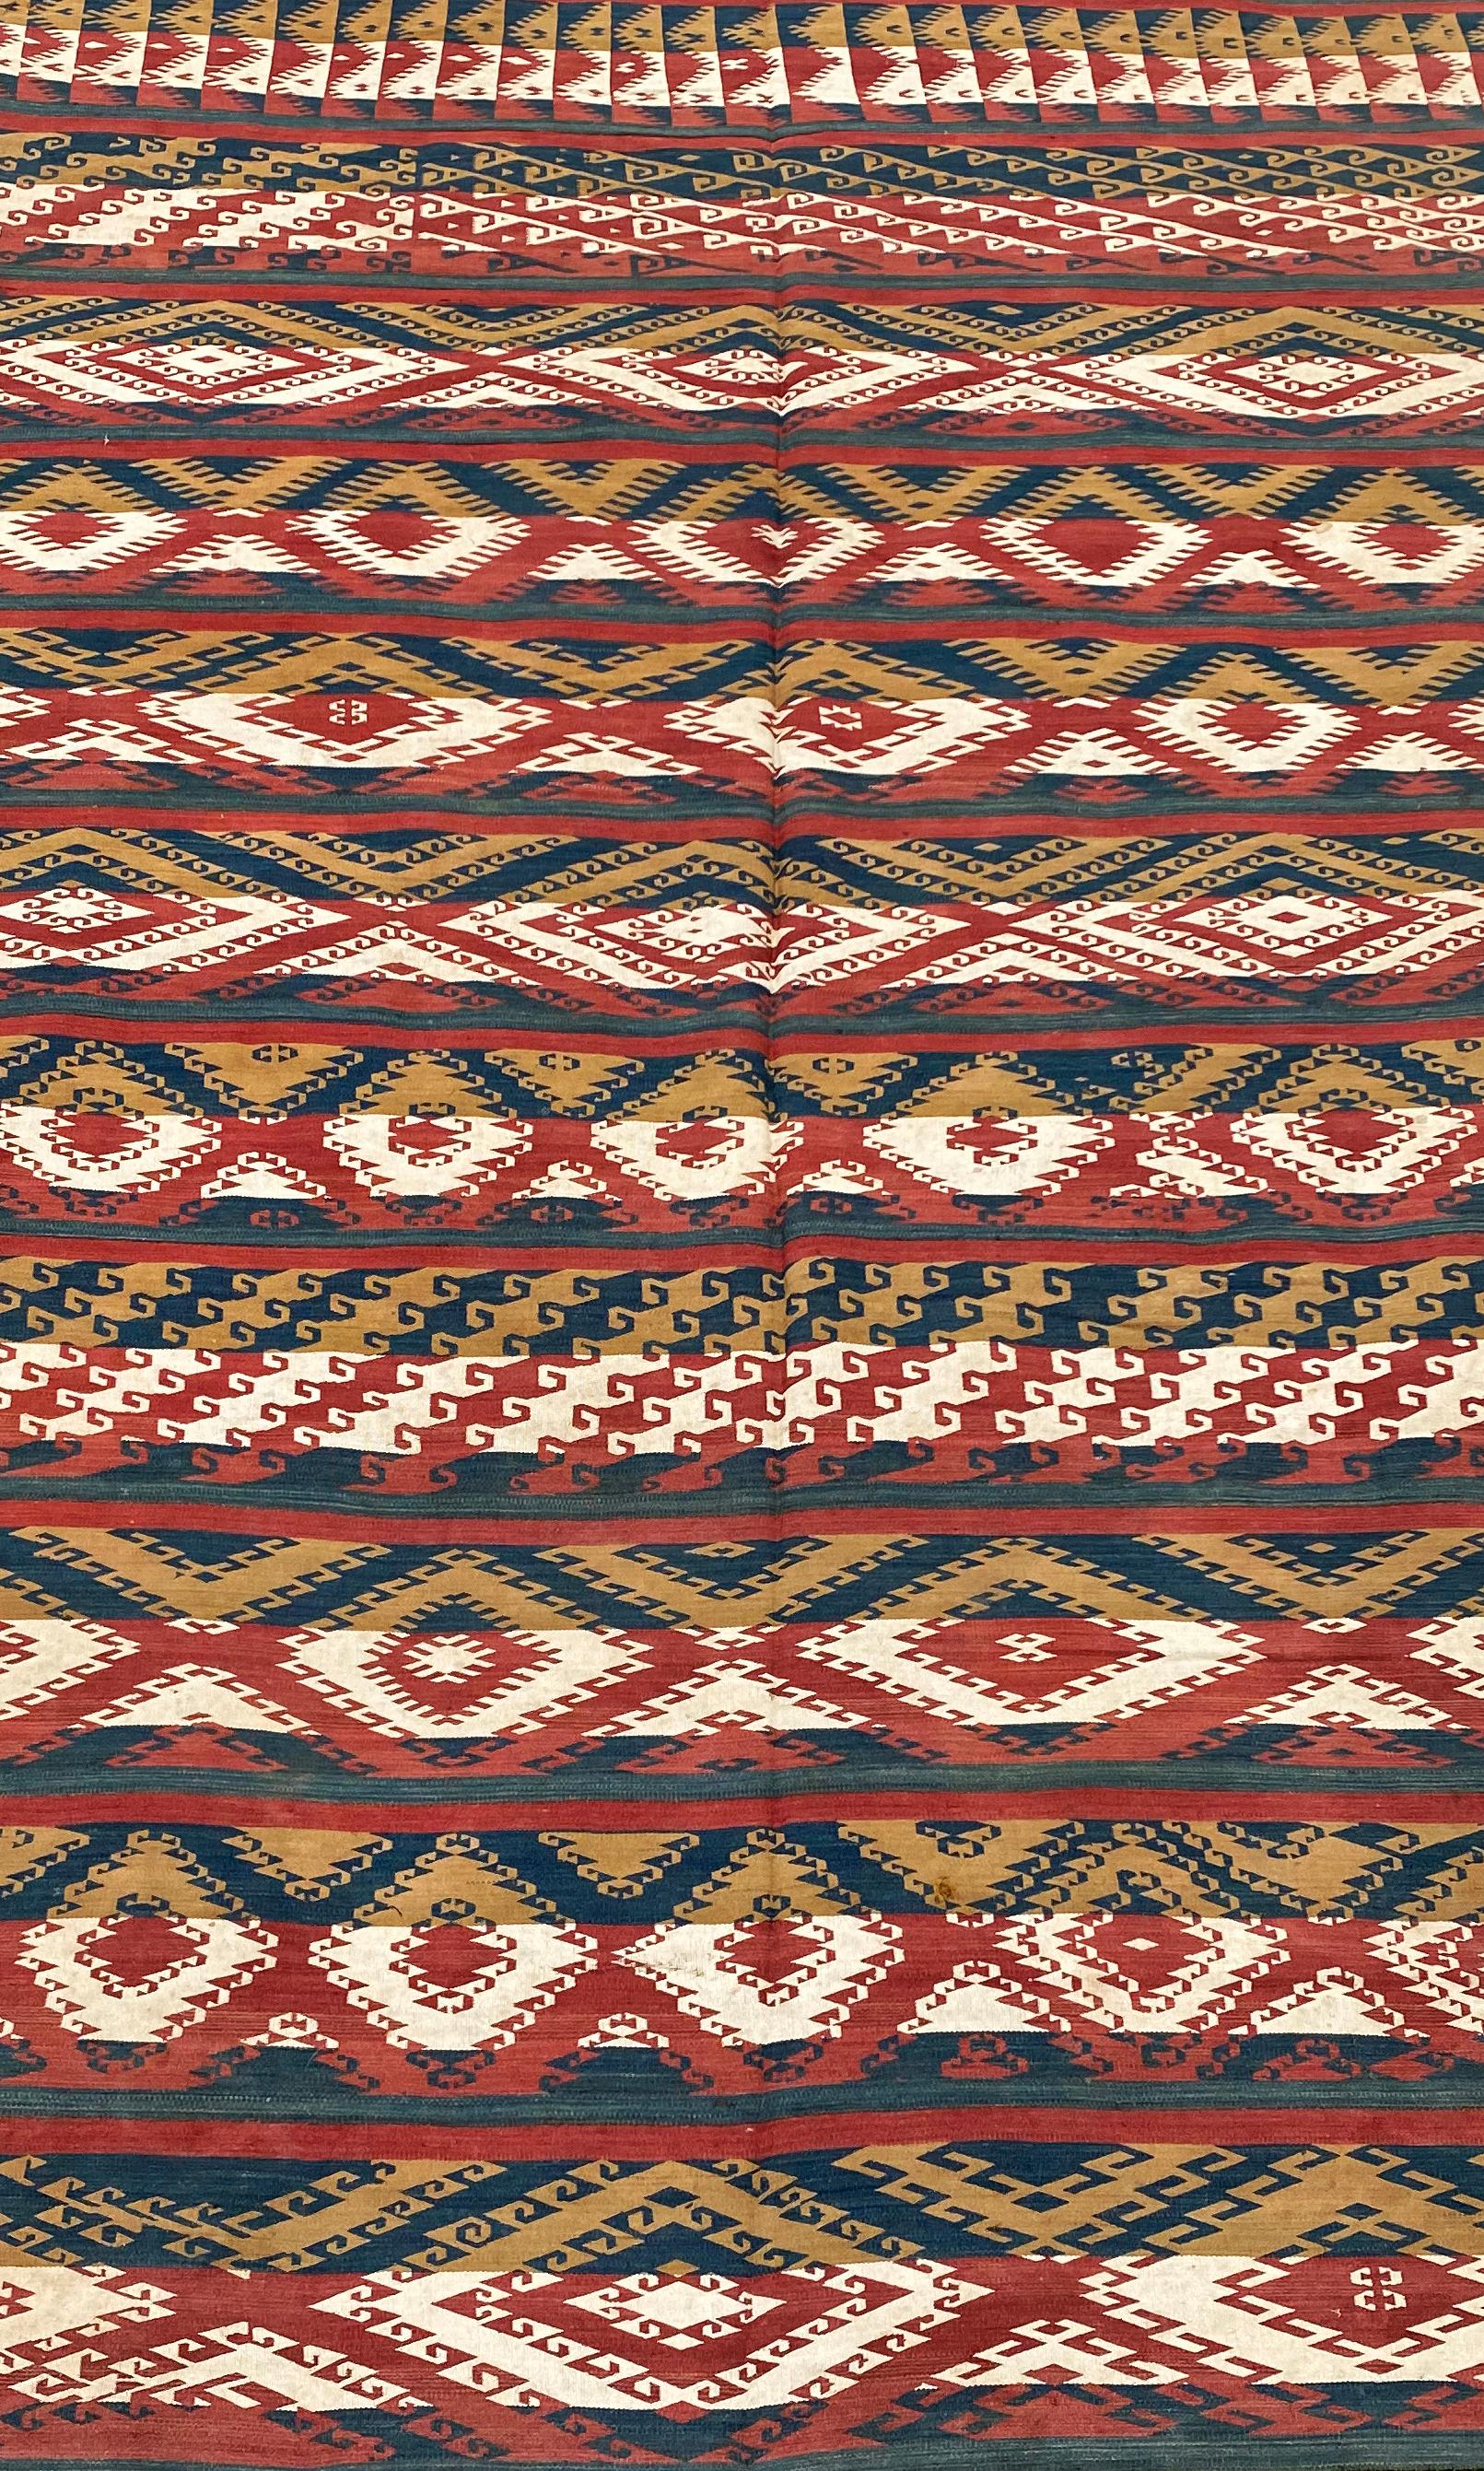 This Antique Uzbekistan Ghudjeri Kilim's dramtic appearance is achieved using only four colours; navy blue, yellow, red & white. Uzbek Ghudjeri are Kilims made up of narrow harizonal strips of ornate, wrap-faced patterning that are cut and sewn